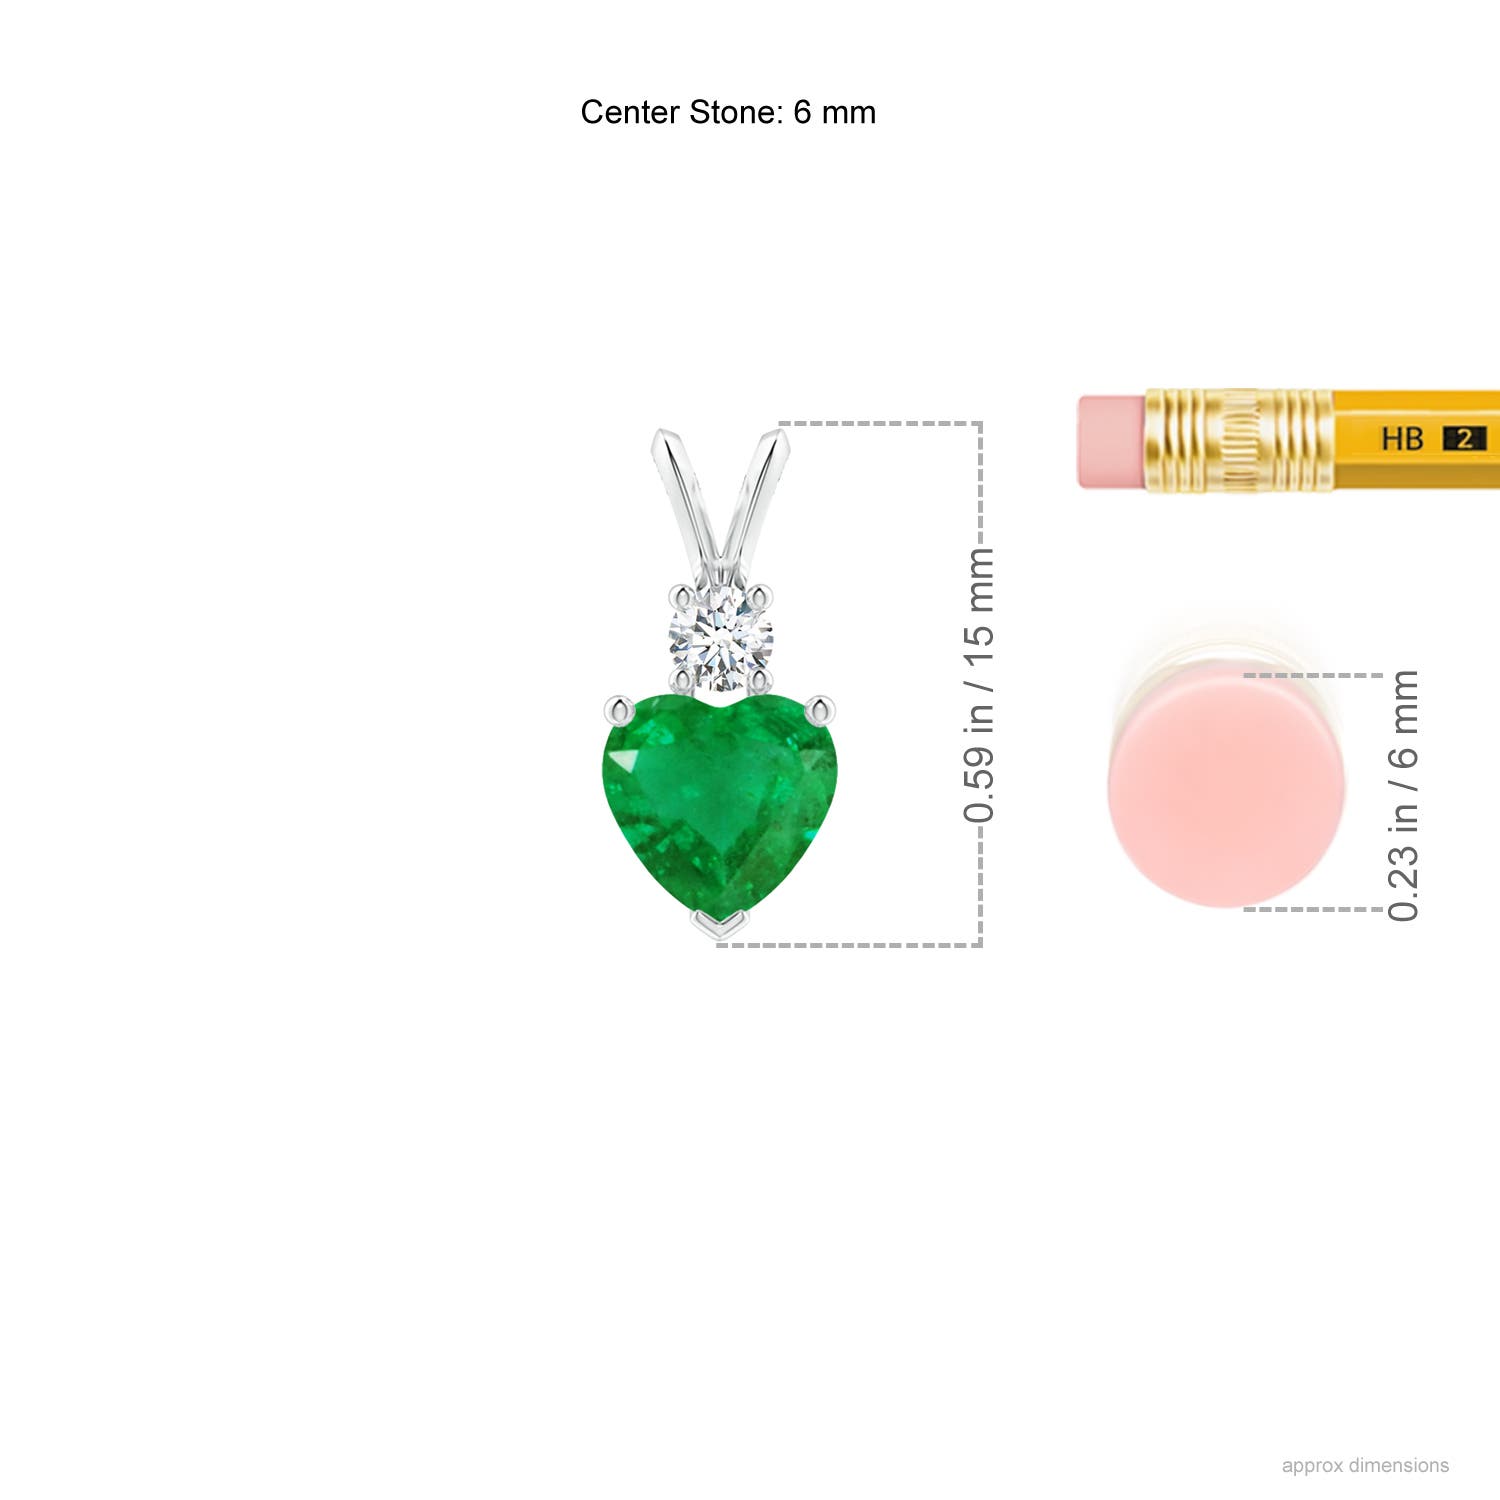 AA - Emerald / 0.68 CT / 14 KT White Gold